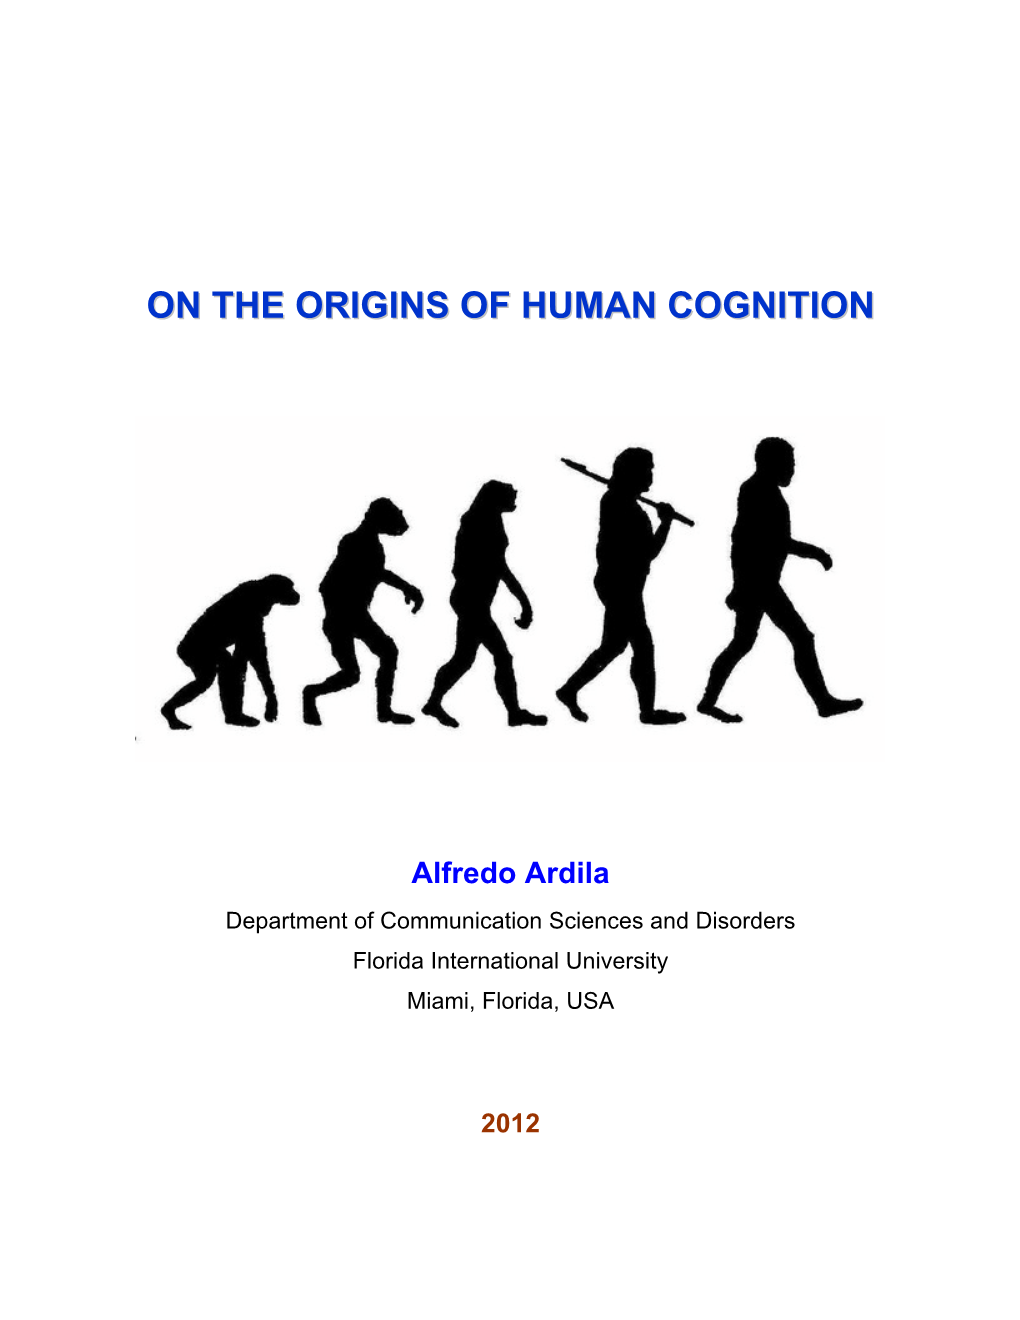 On the Origins of Human Cognition